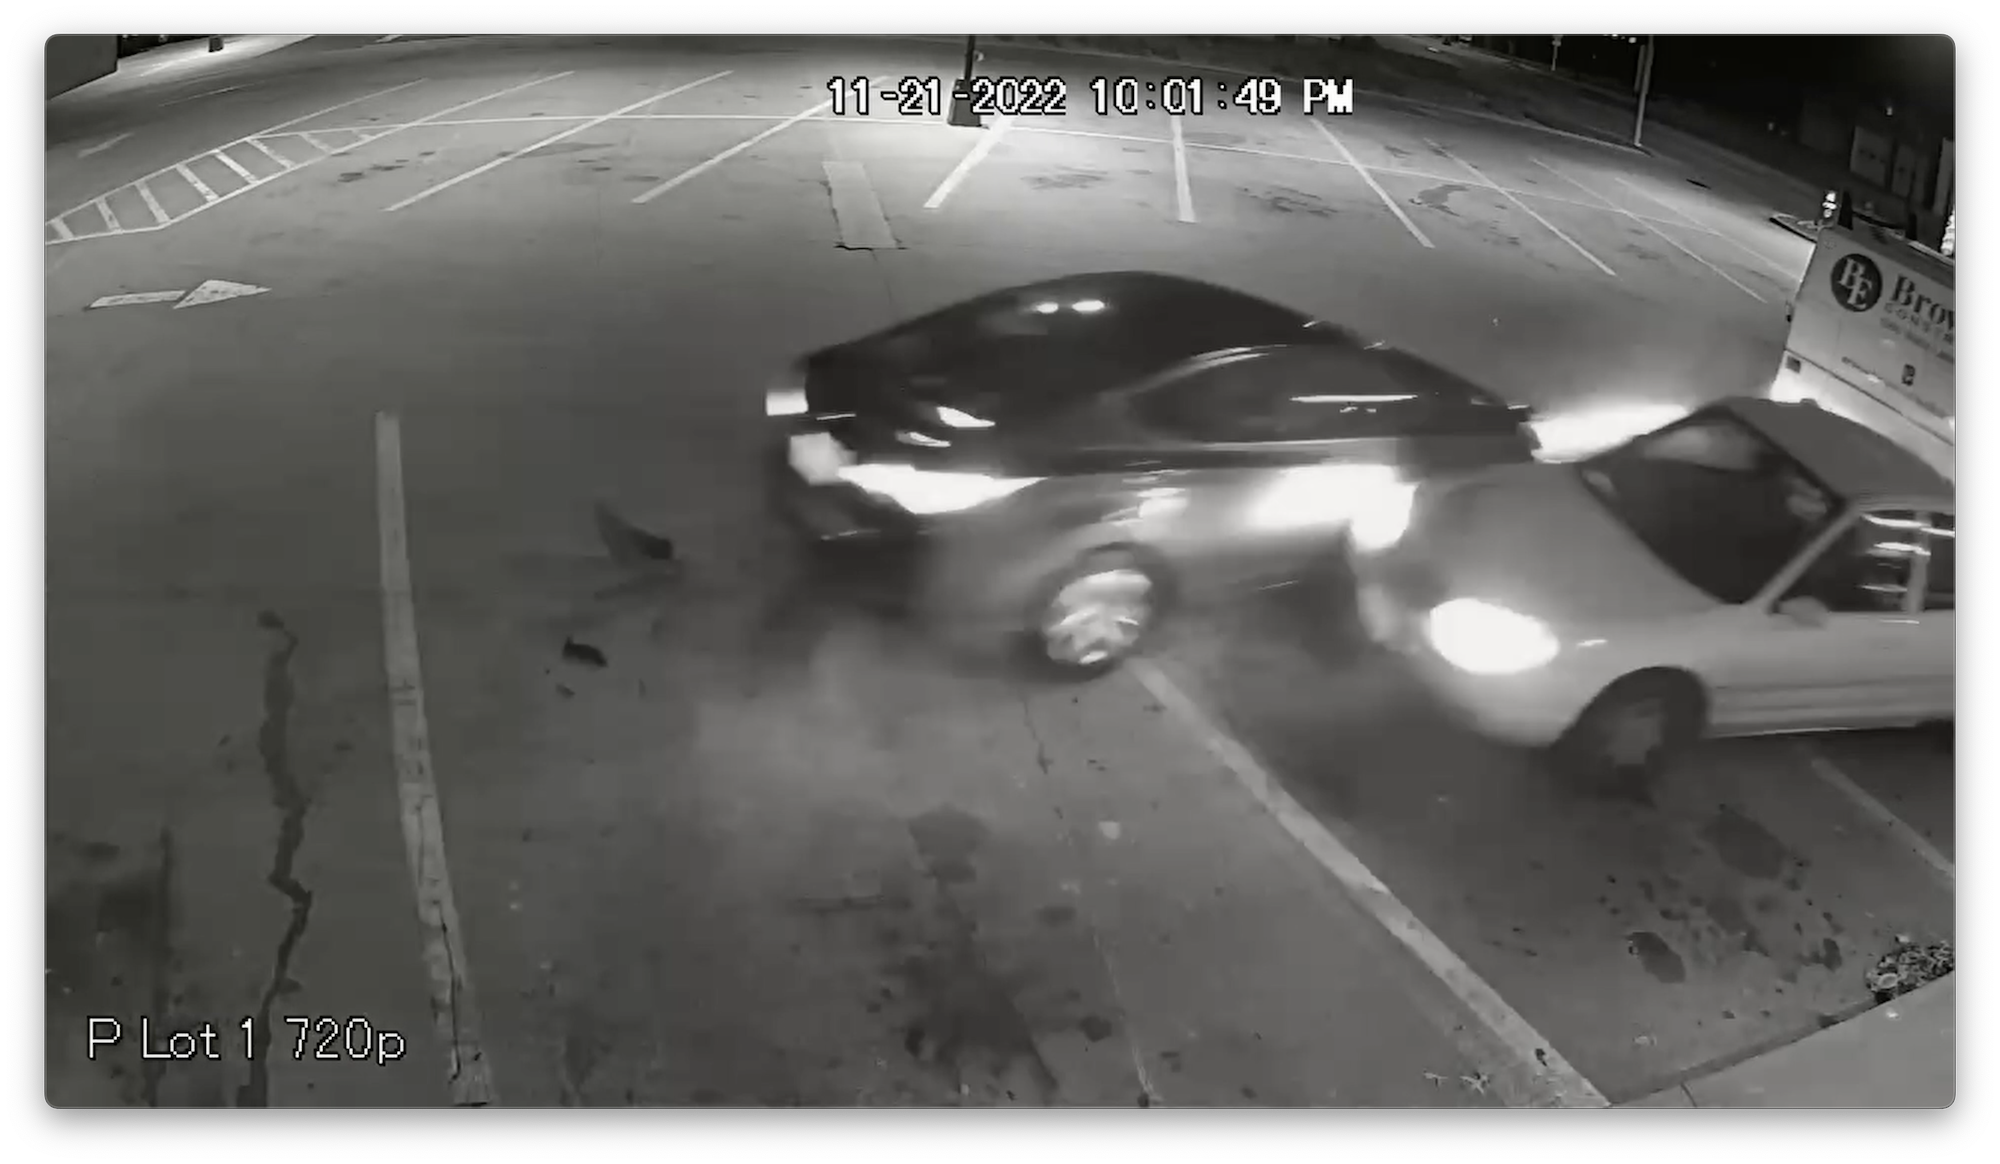 Update Video Obtained Showing Quincy Man Ramming Car Into Vehicle Filled With People In